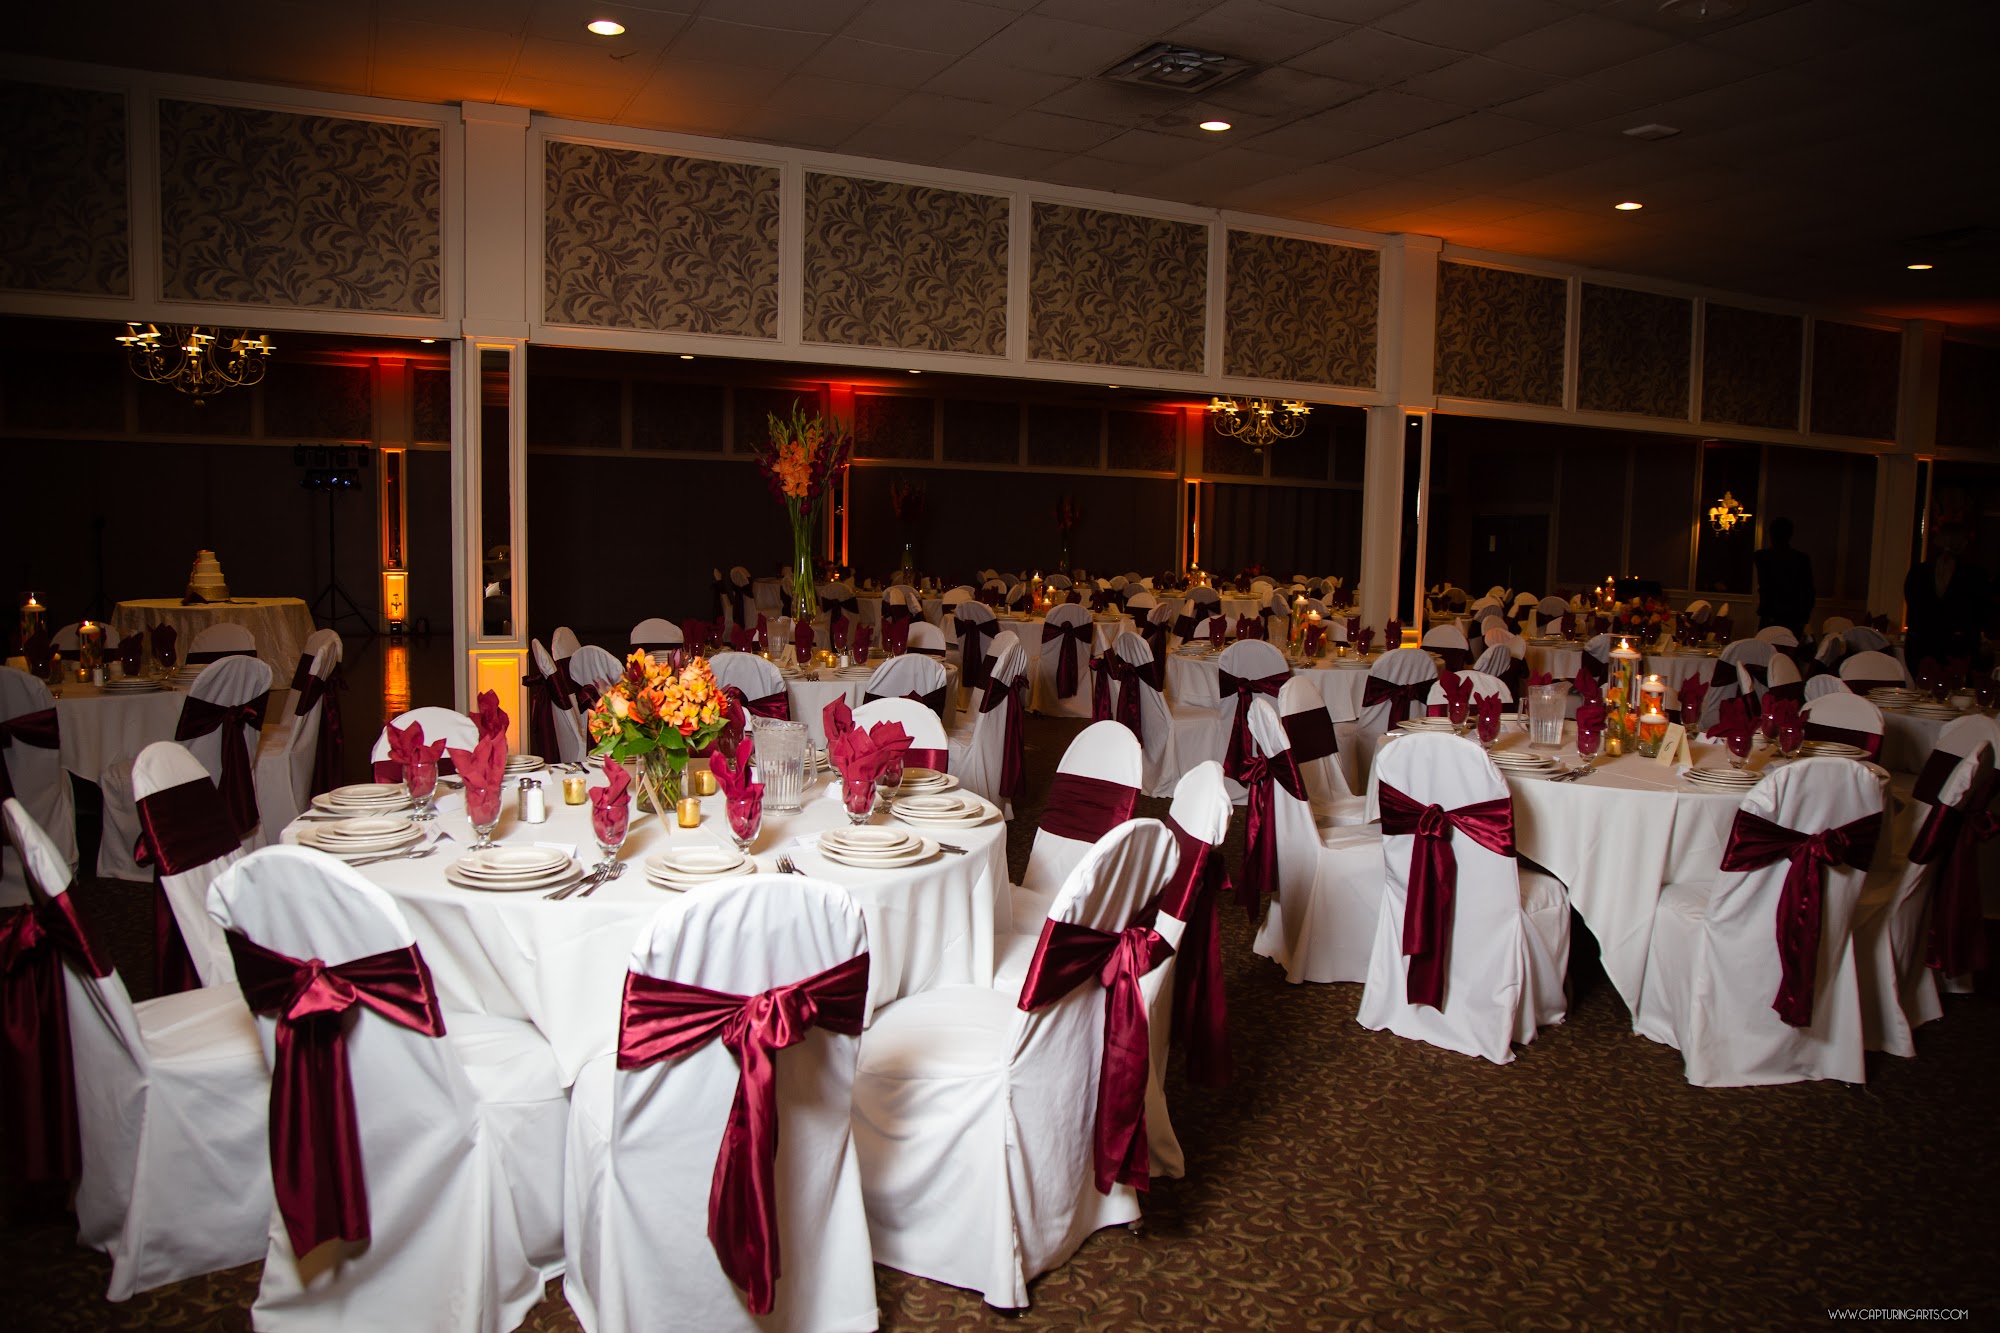 Zuccaro's Banquets & Catering